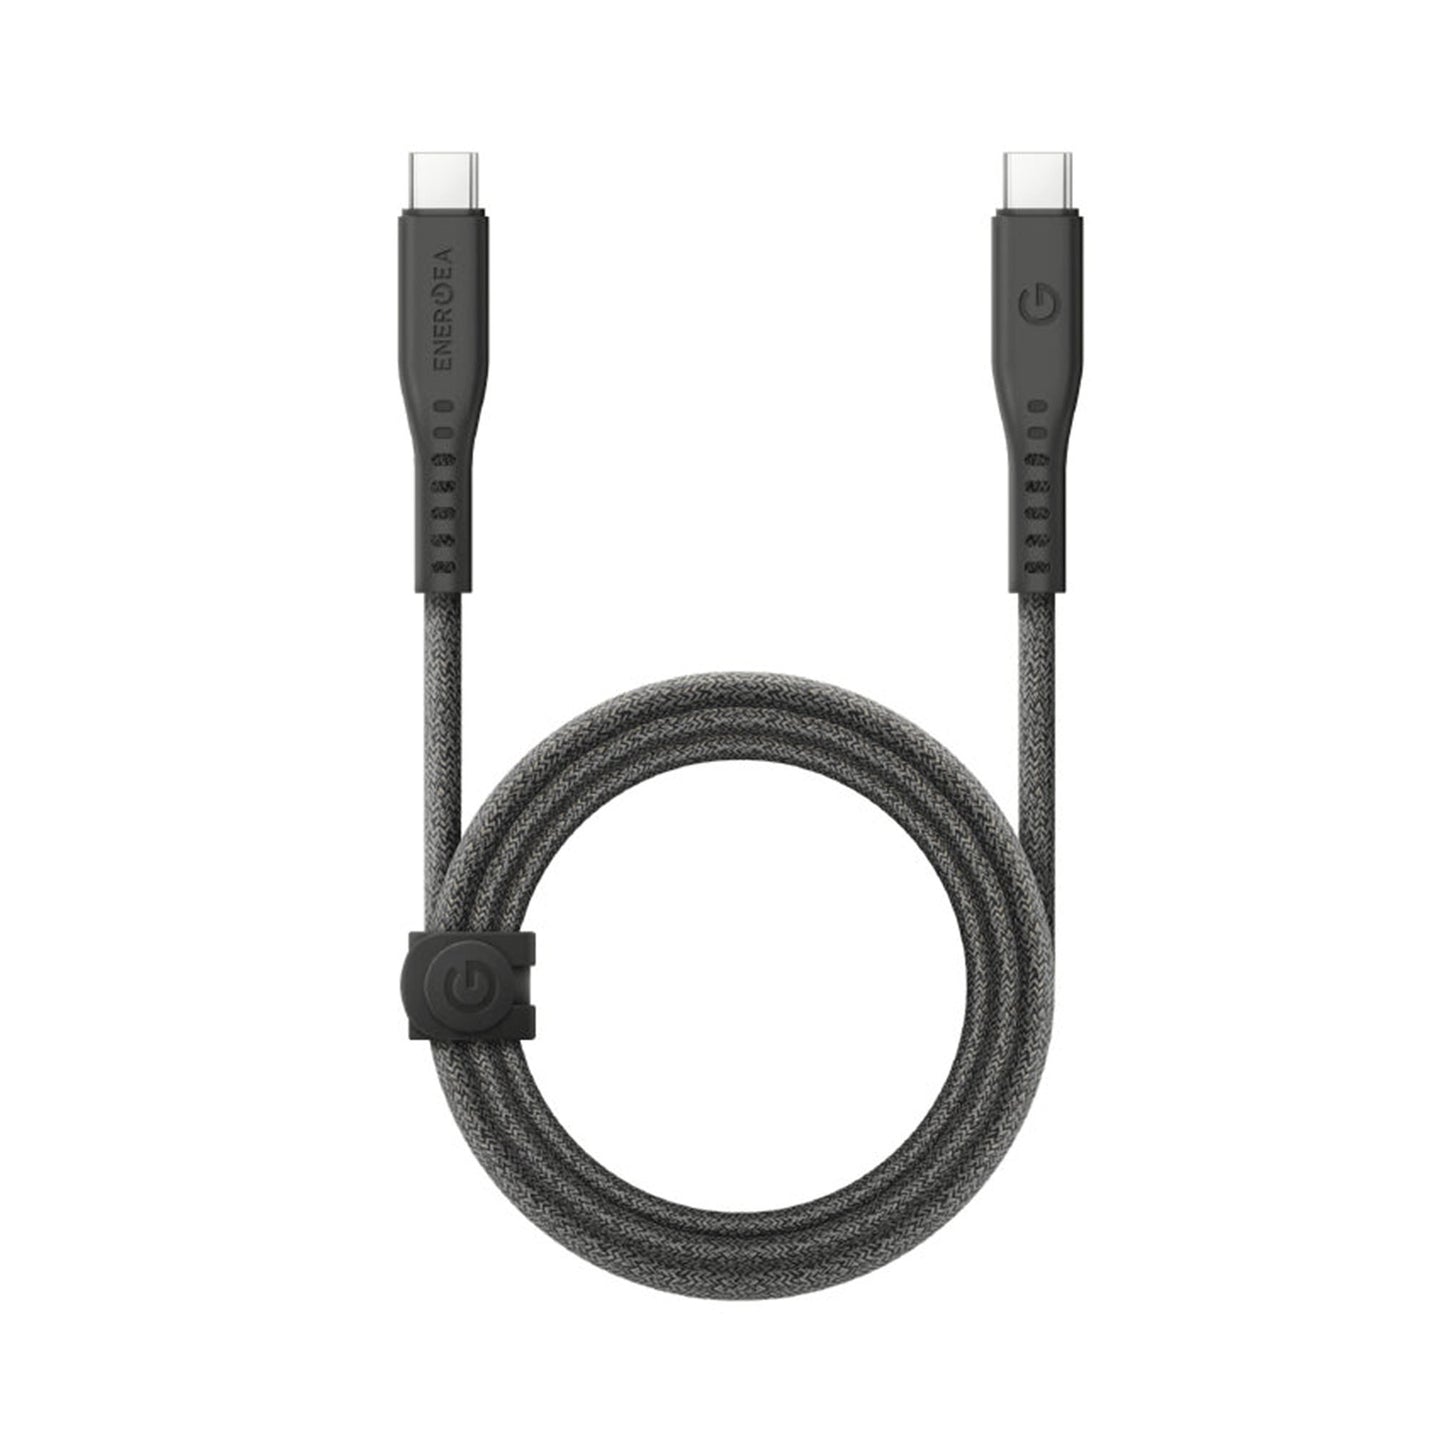 ENERGEA Flow 240w USB-C to USB-C PD Fast Charging Cable 1.5m - Black